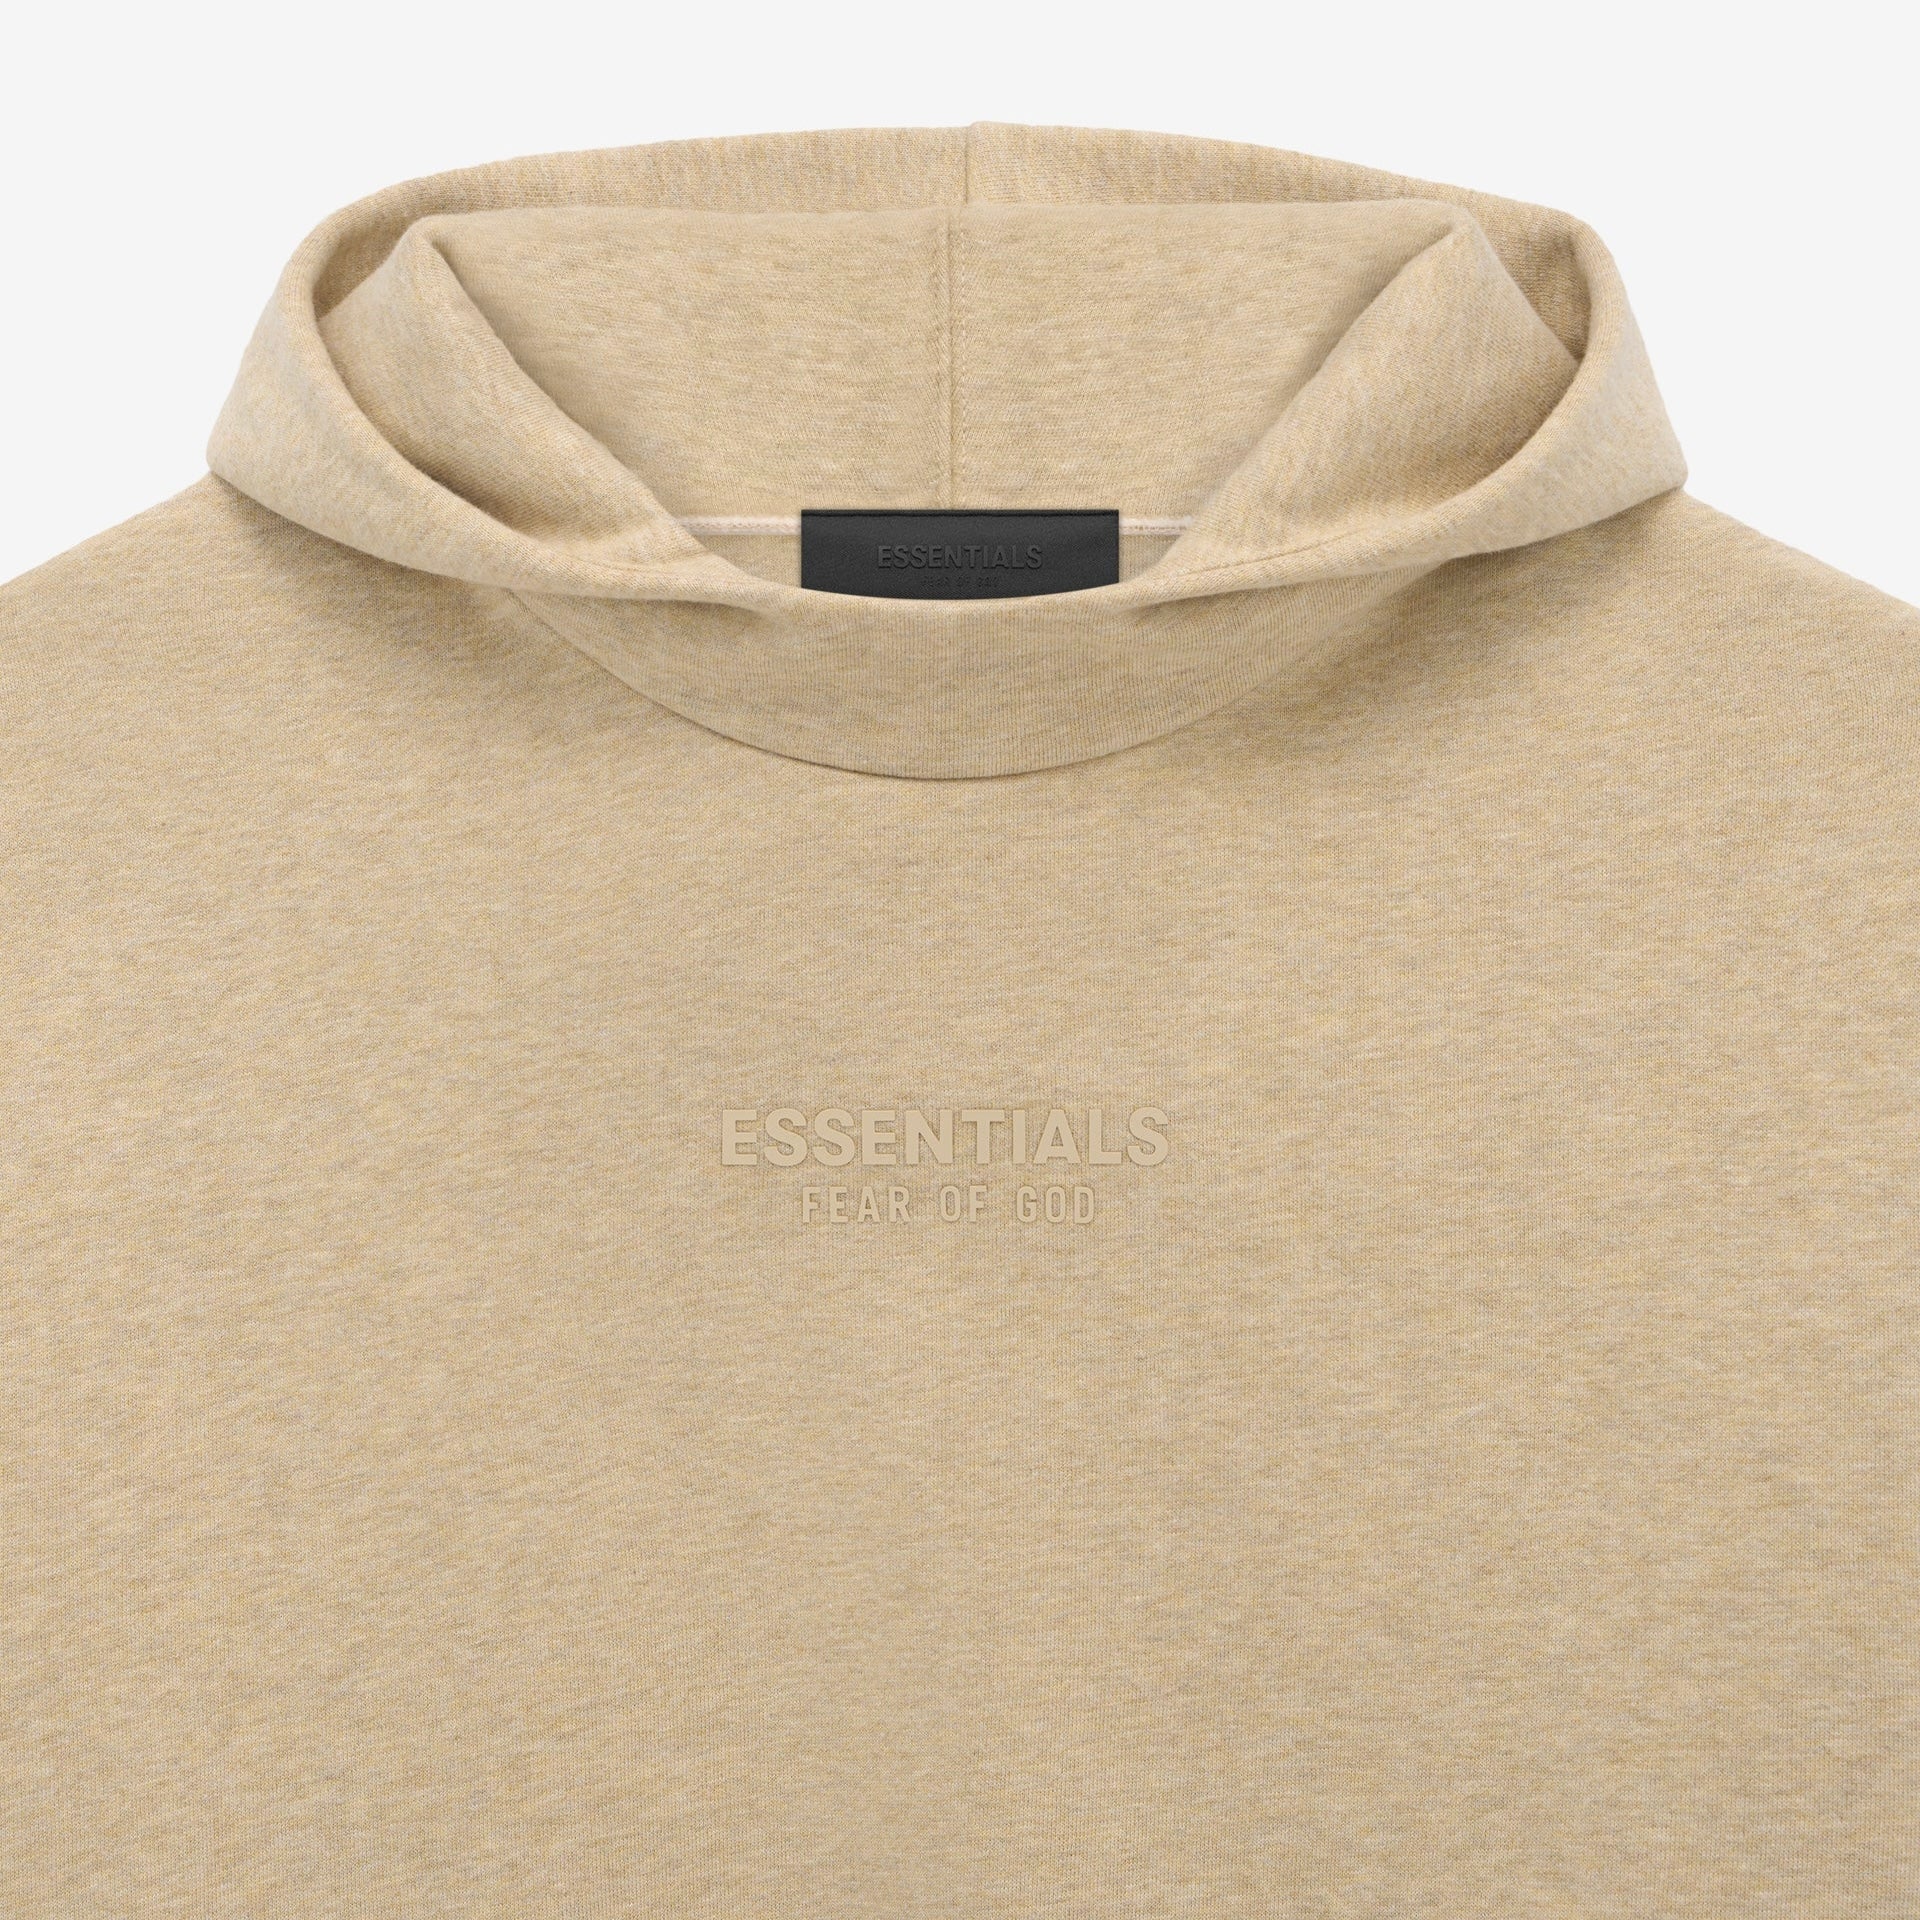 Fear of God Essentials Gold Heather Hoodie Close View